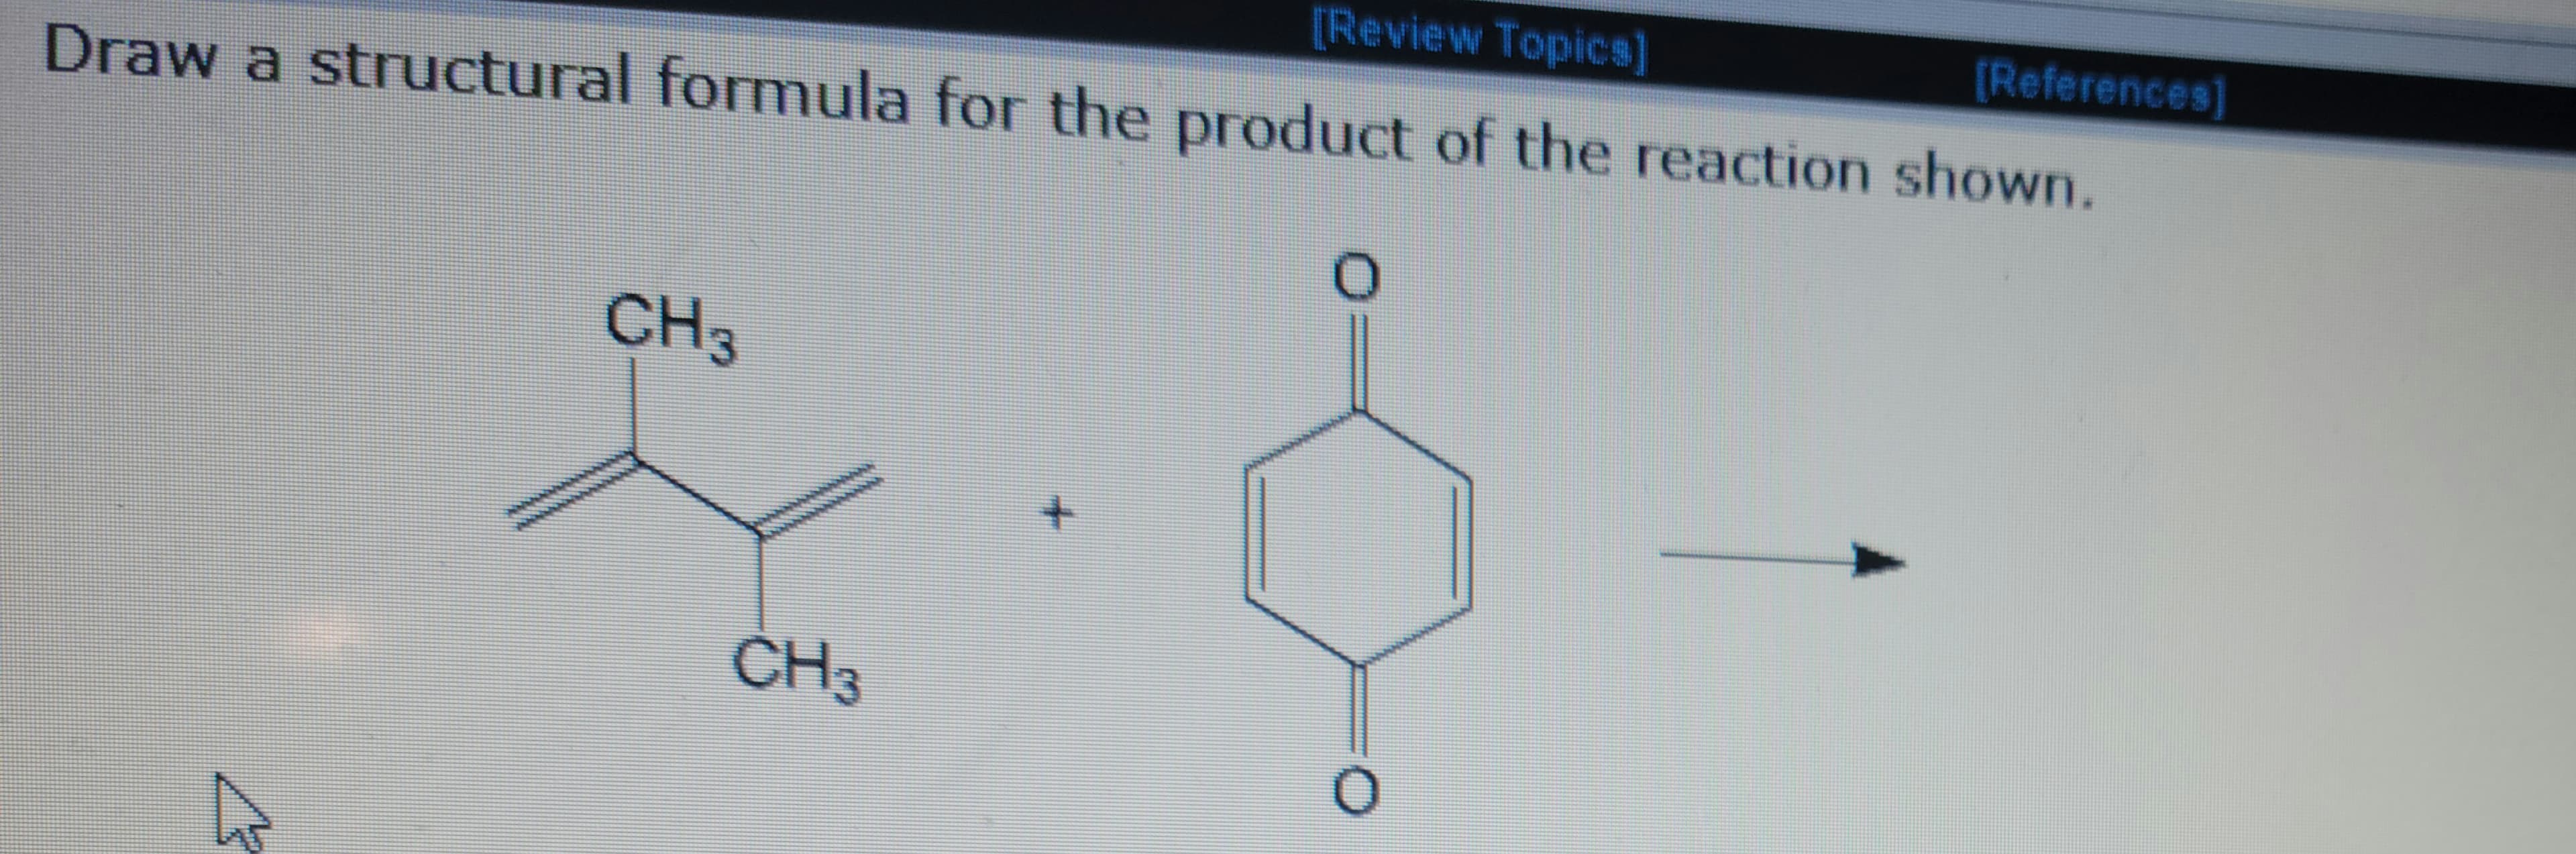 [Review Topics]
Draw a structural formula for the product of the reaction shown.
CH3
CH3
0
wwwwwww
0
[References]